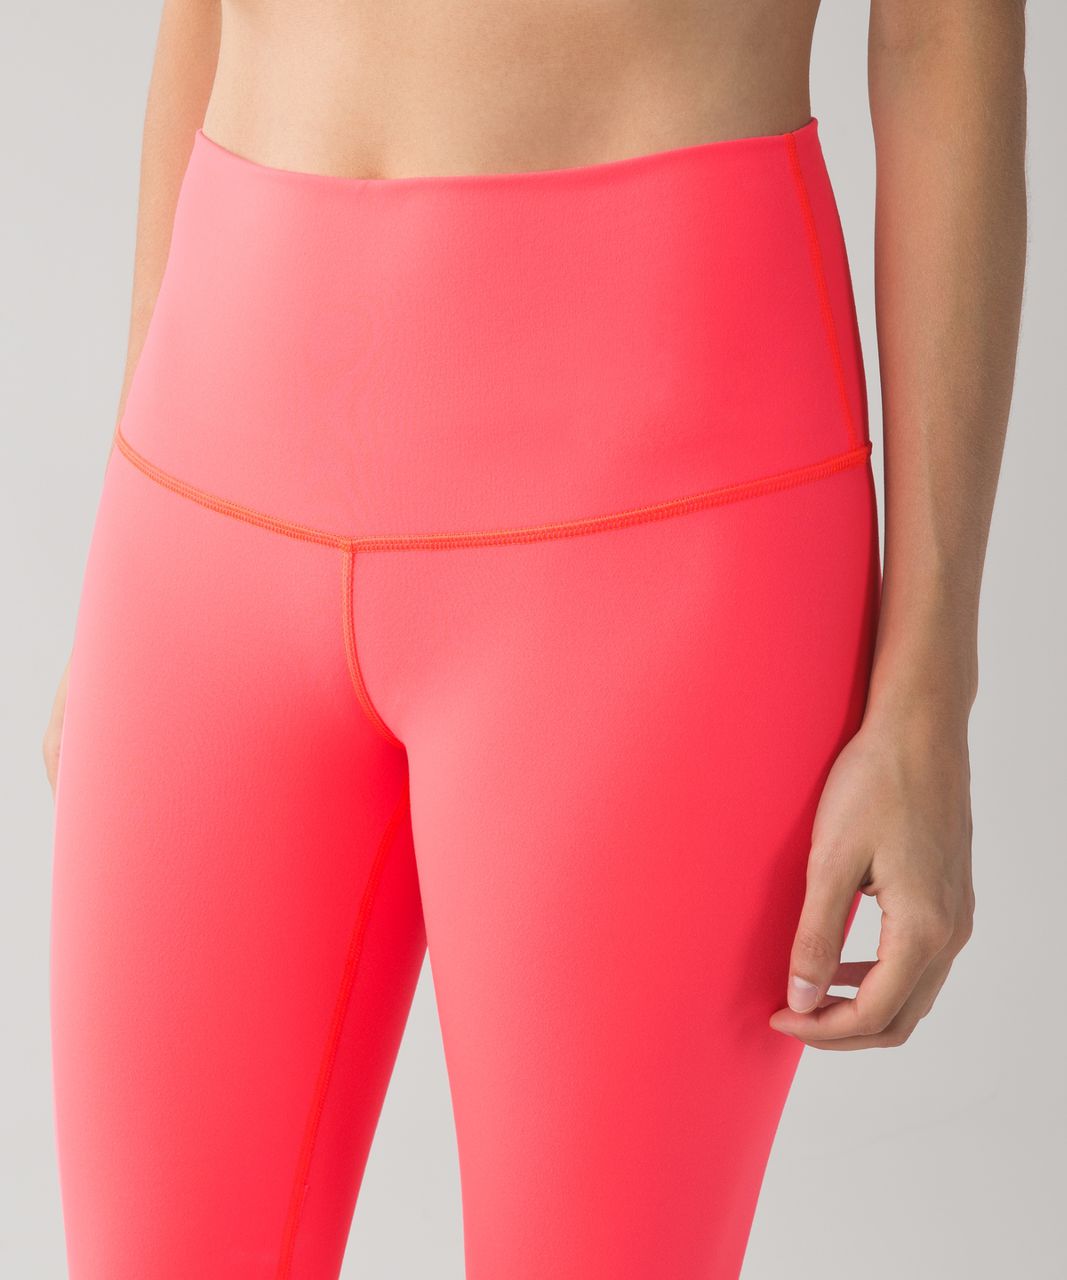 Lululemon Wunder Under Crop II *Full-On Luon (Roll Down) - Electric Coral